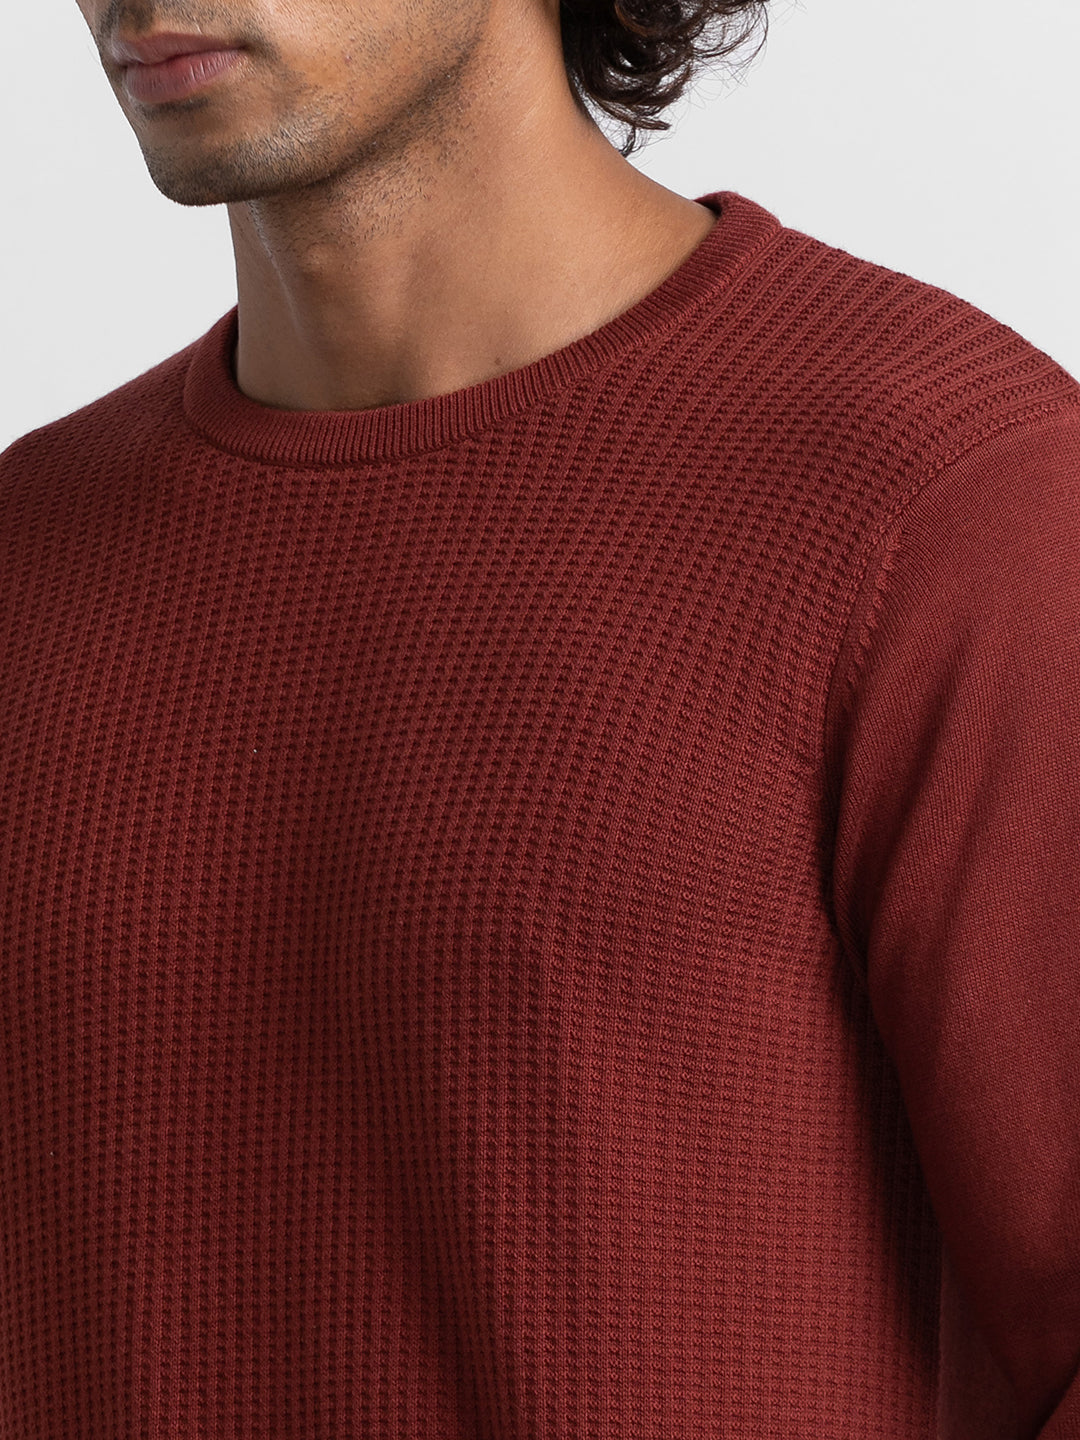 Spykar Brick Red Cotton Full Sleeve Casual Sweater For Men